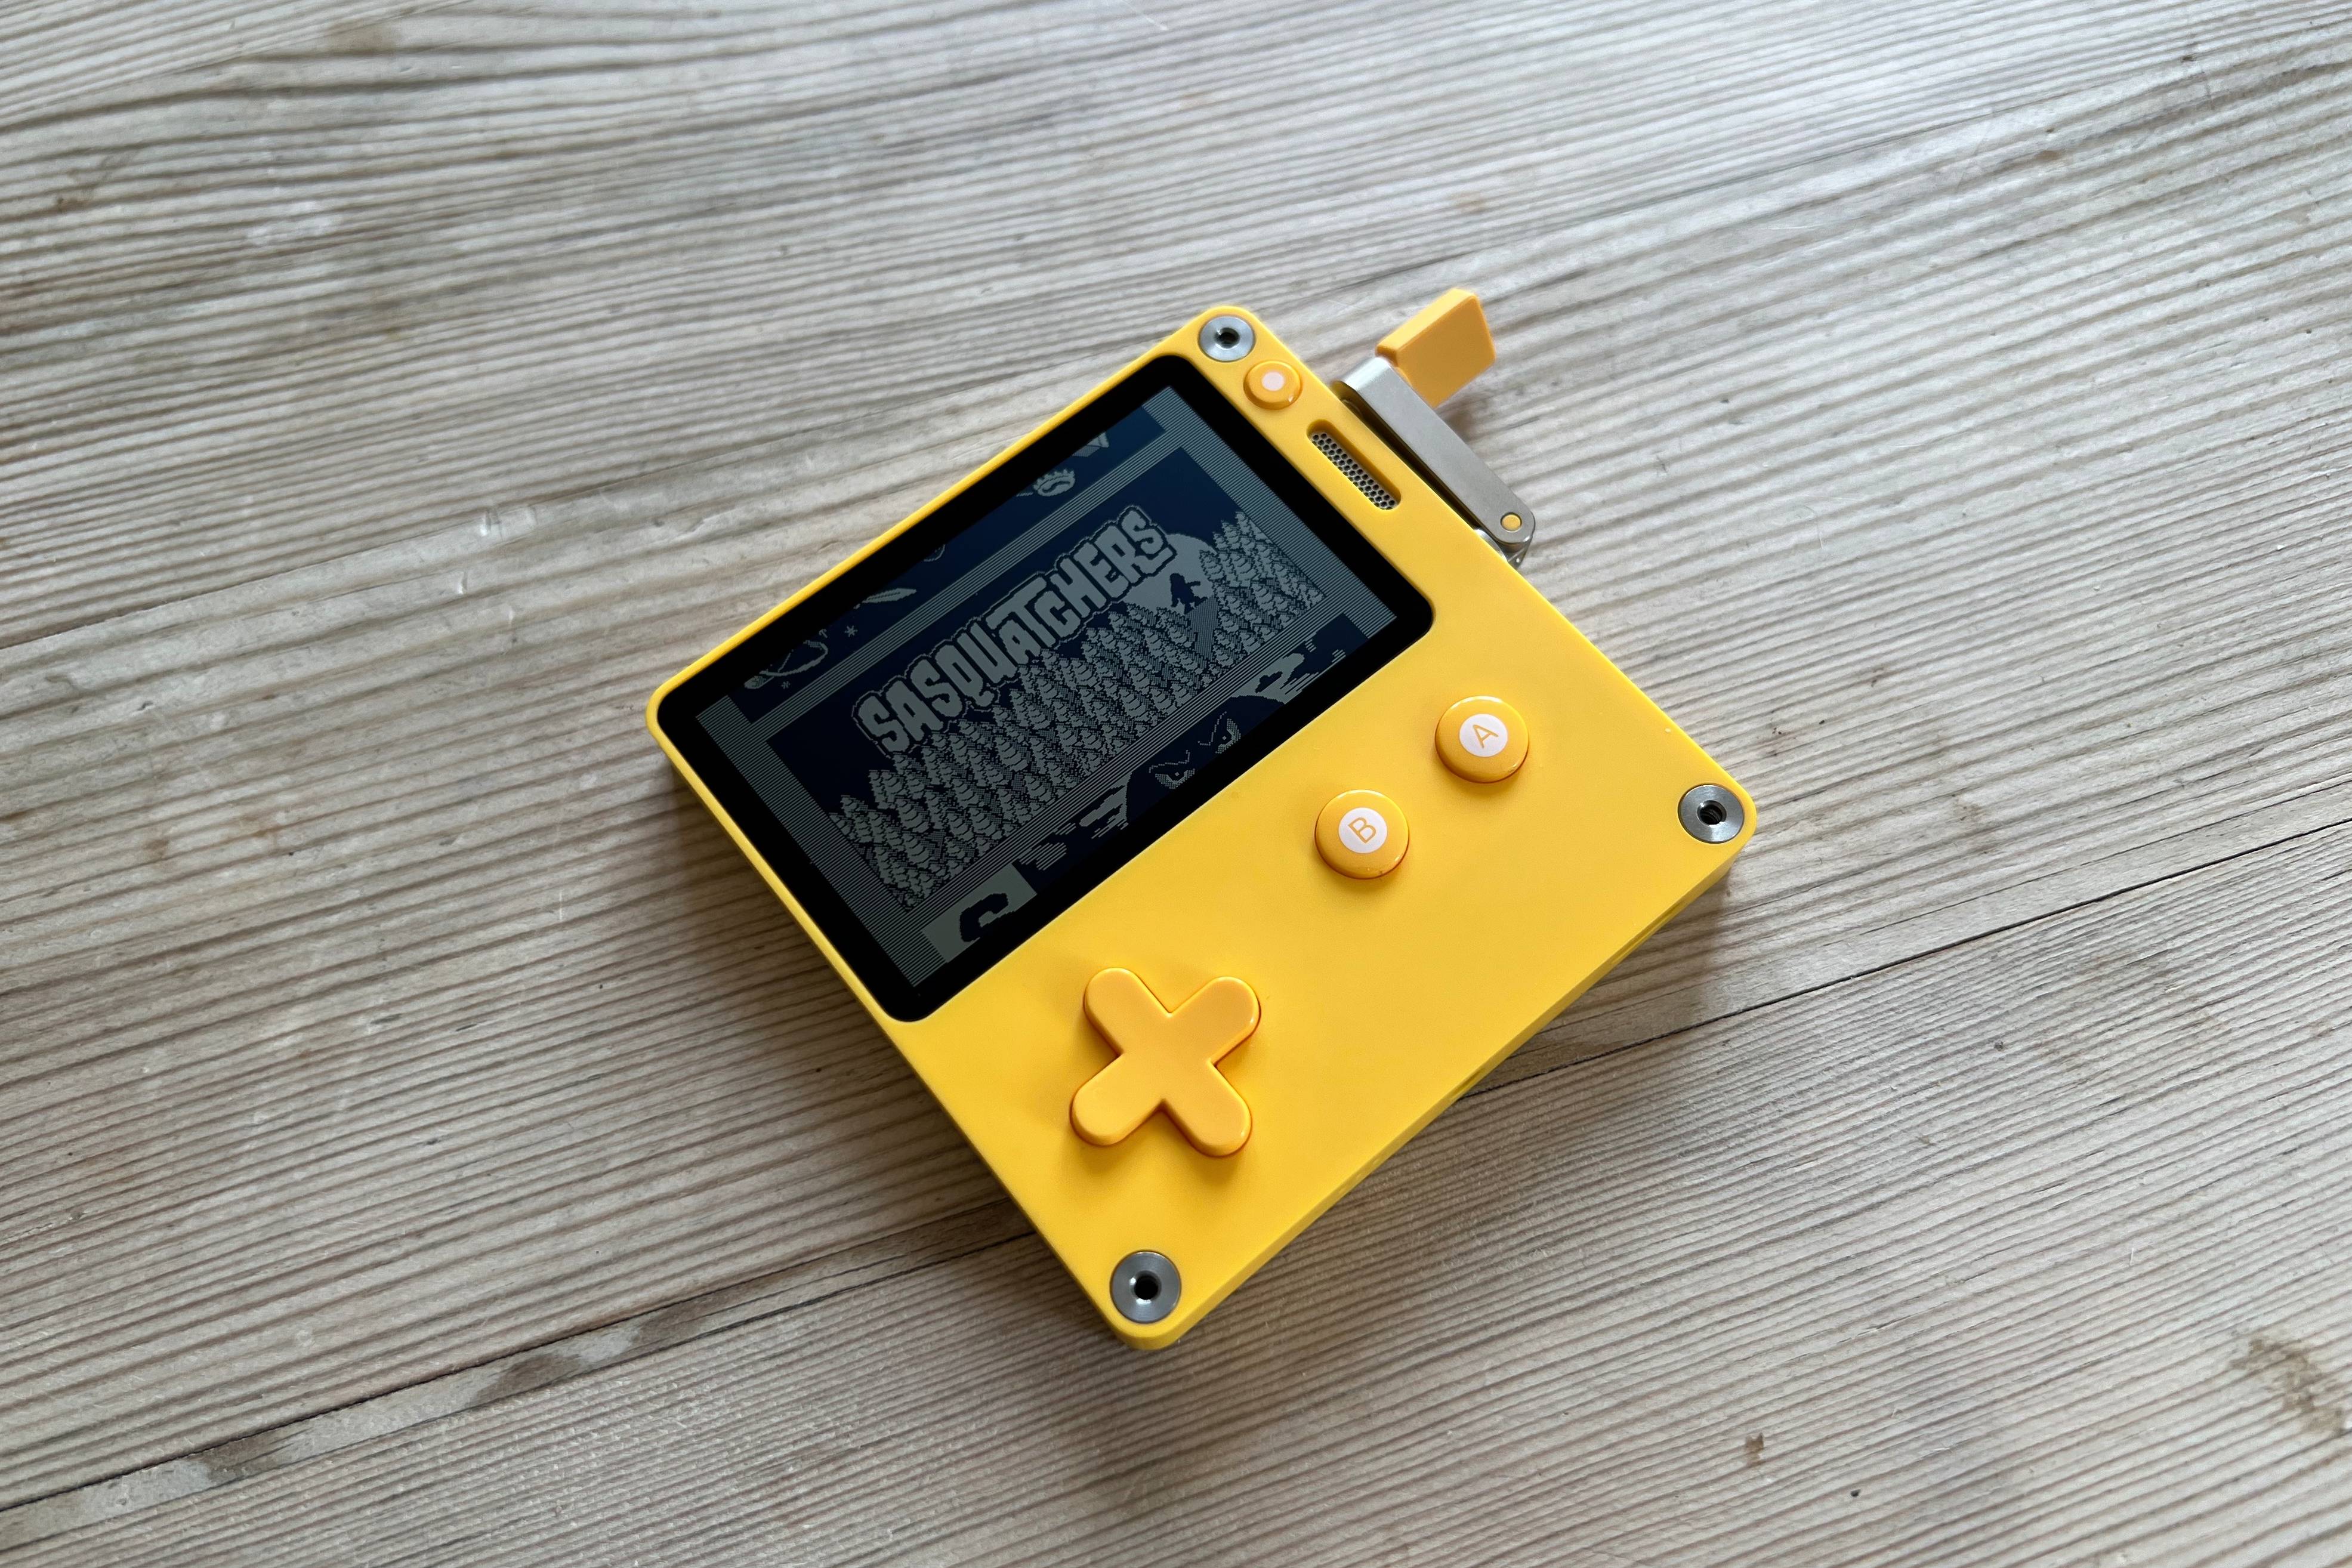 Playdate review: The little yellow handheld that's all about fun